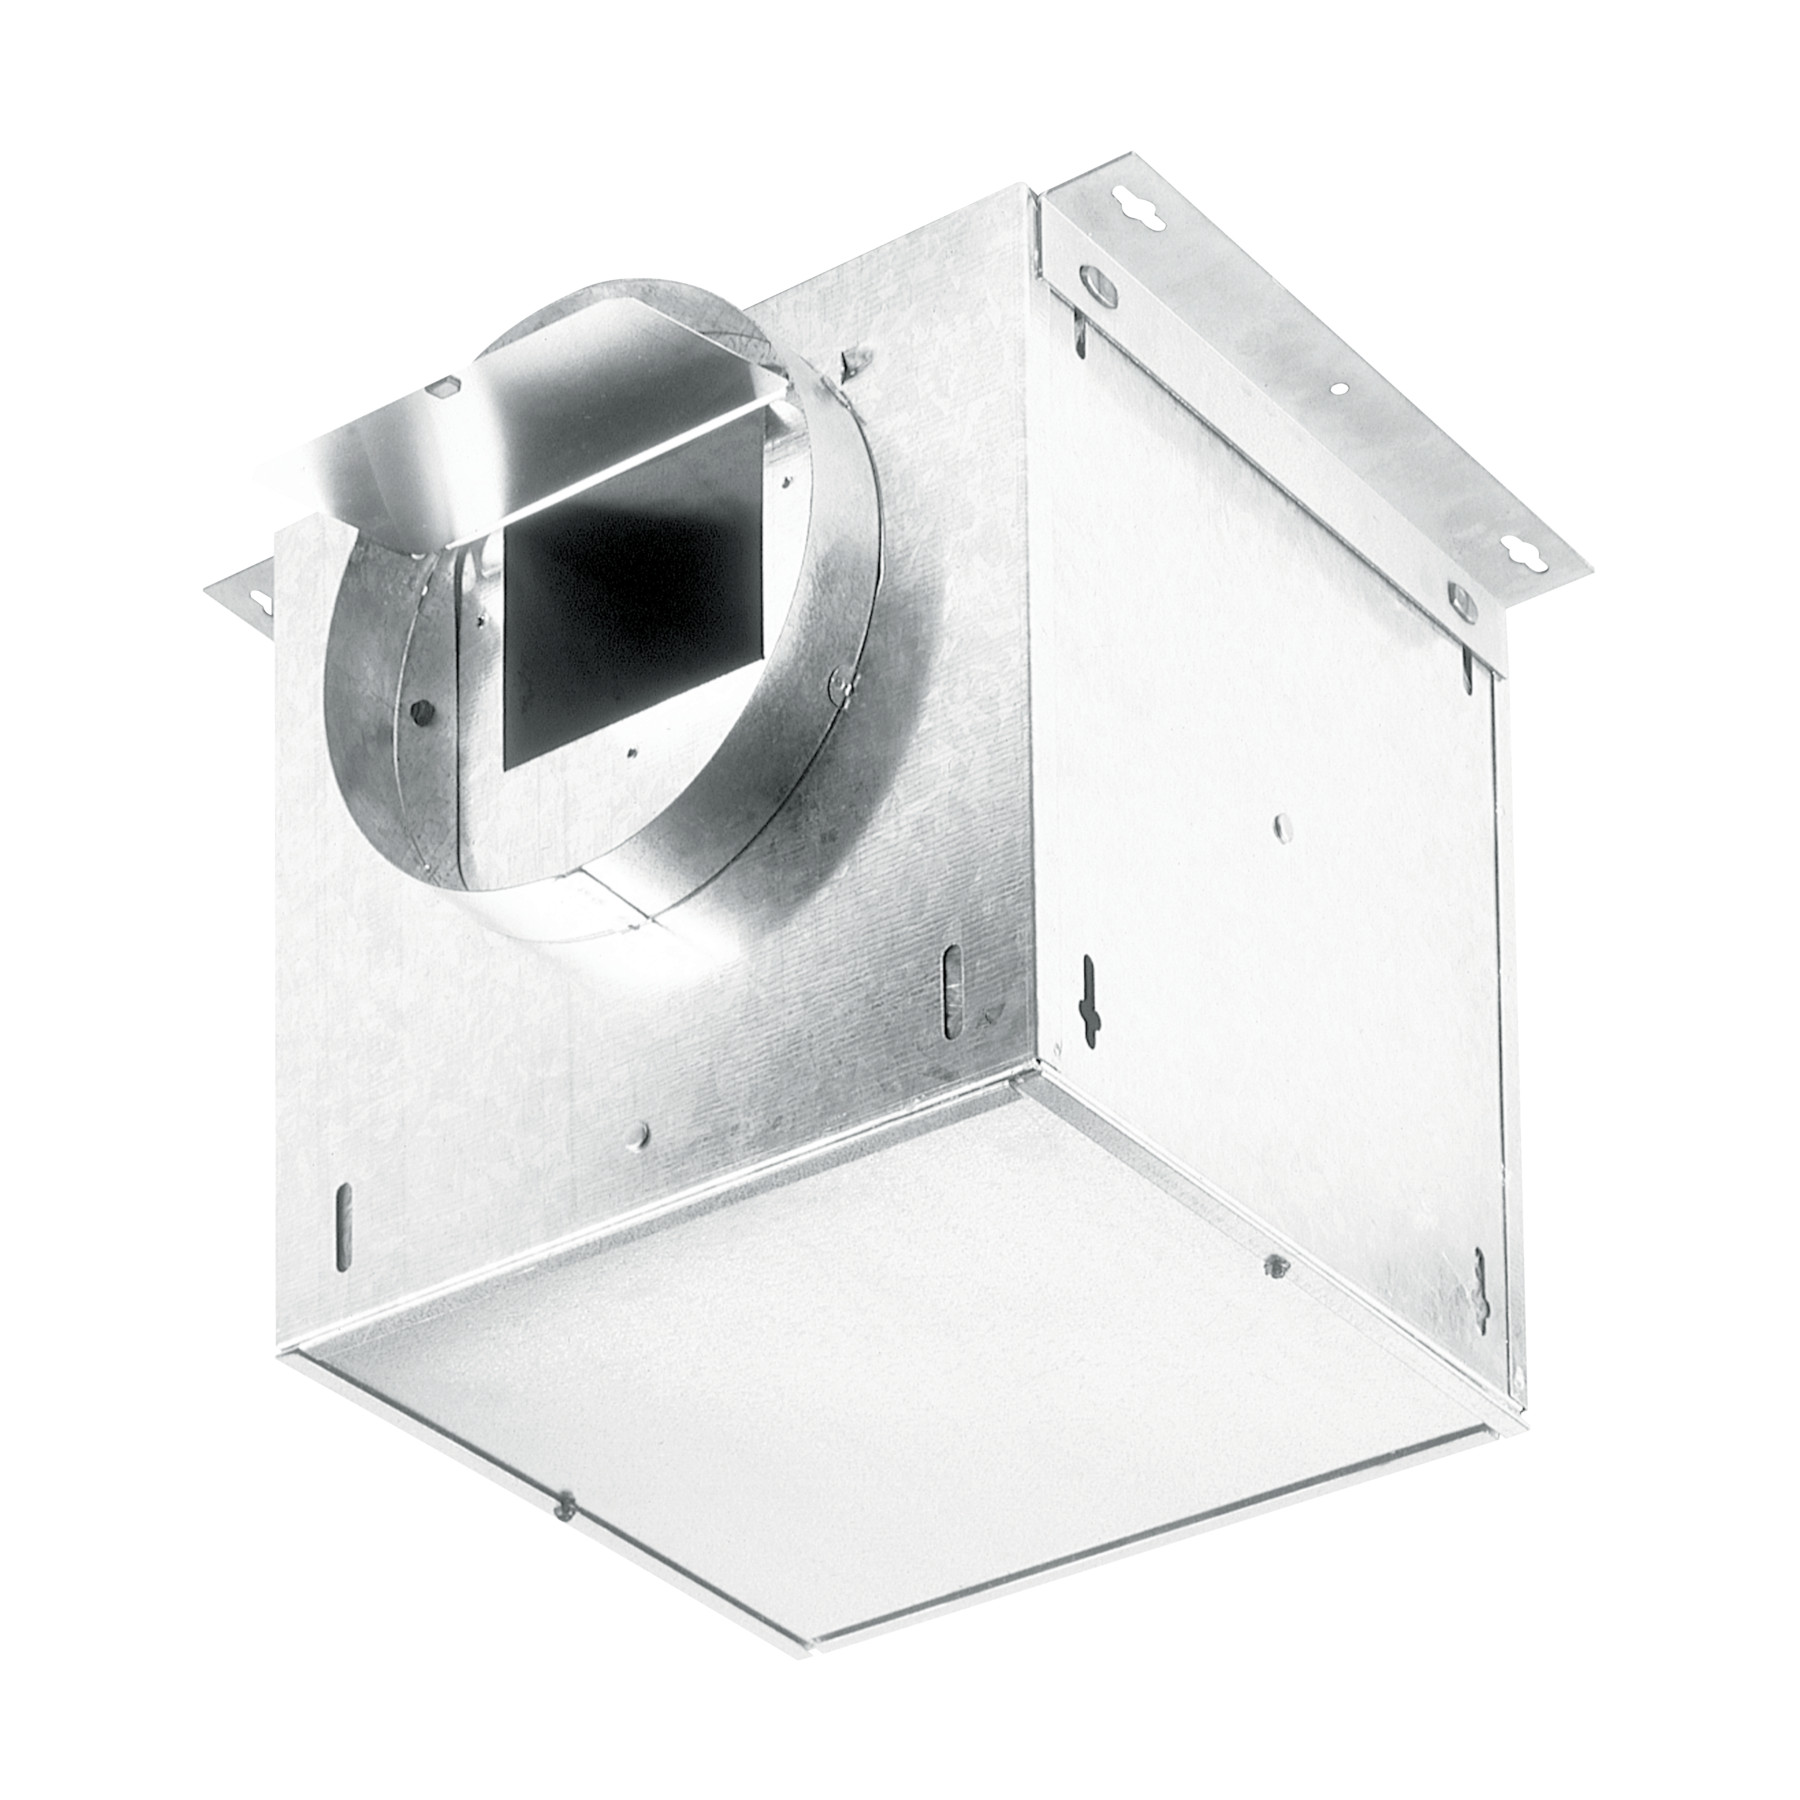 280 CFM In-Line Blower for use with Broan® Range Hoods